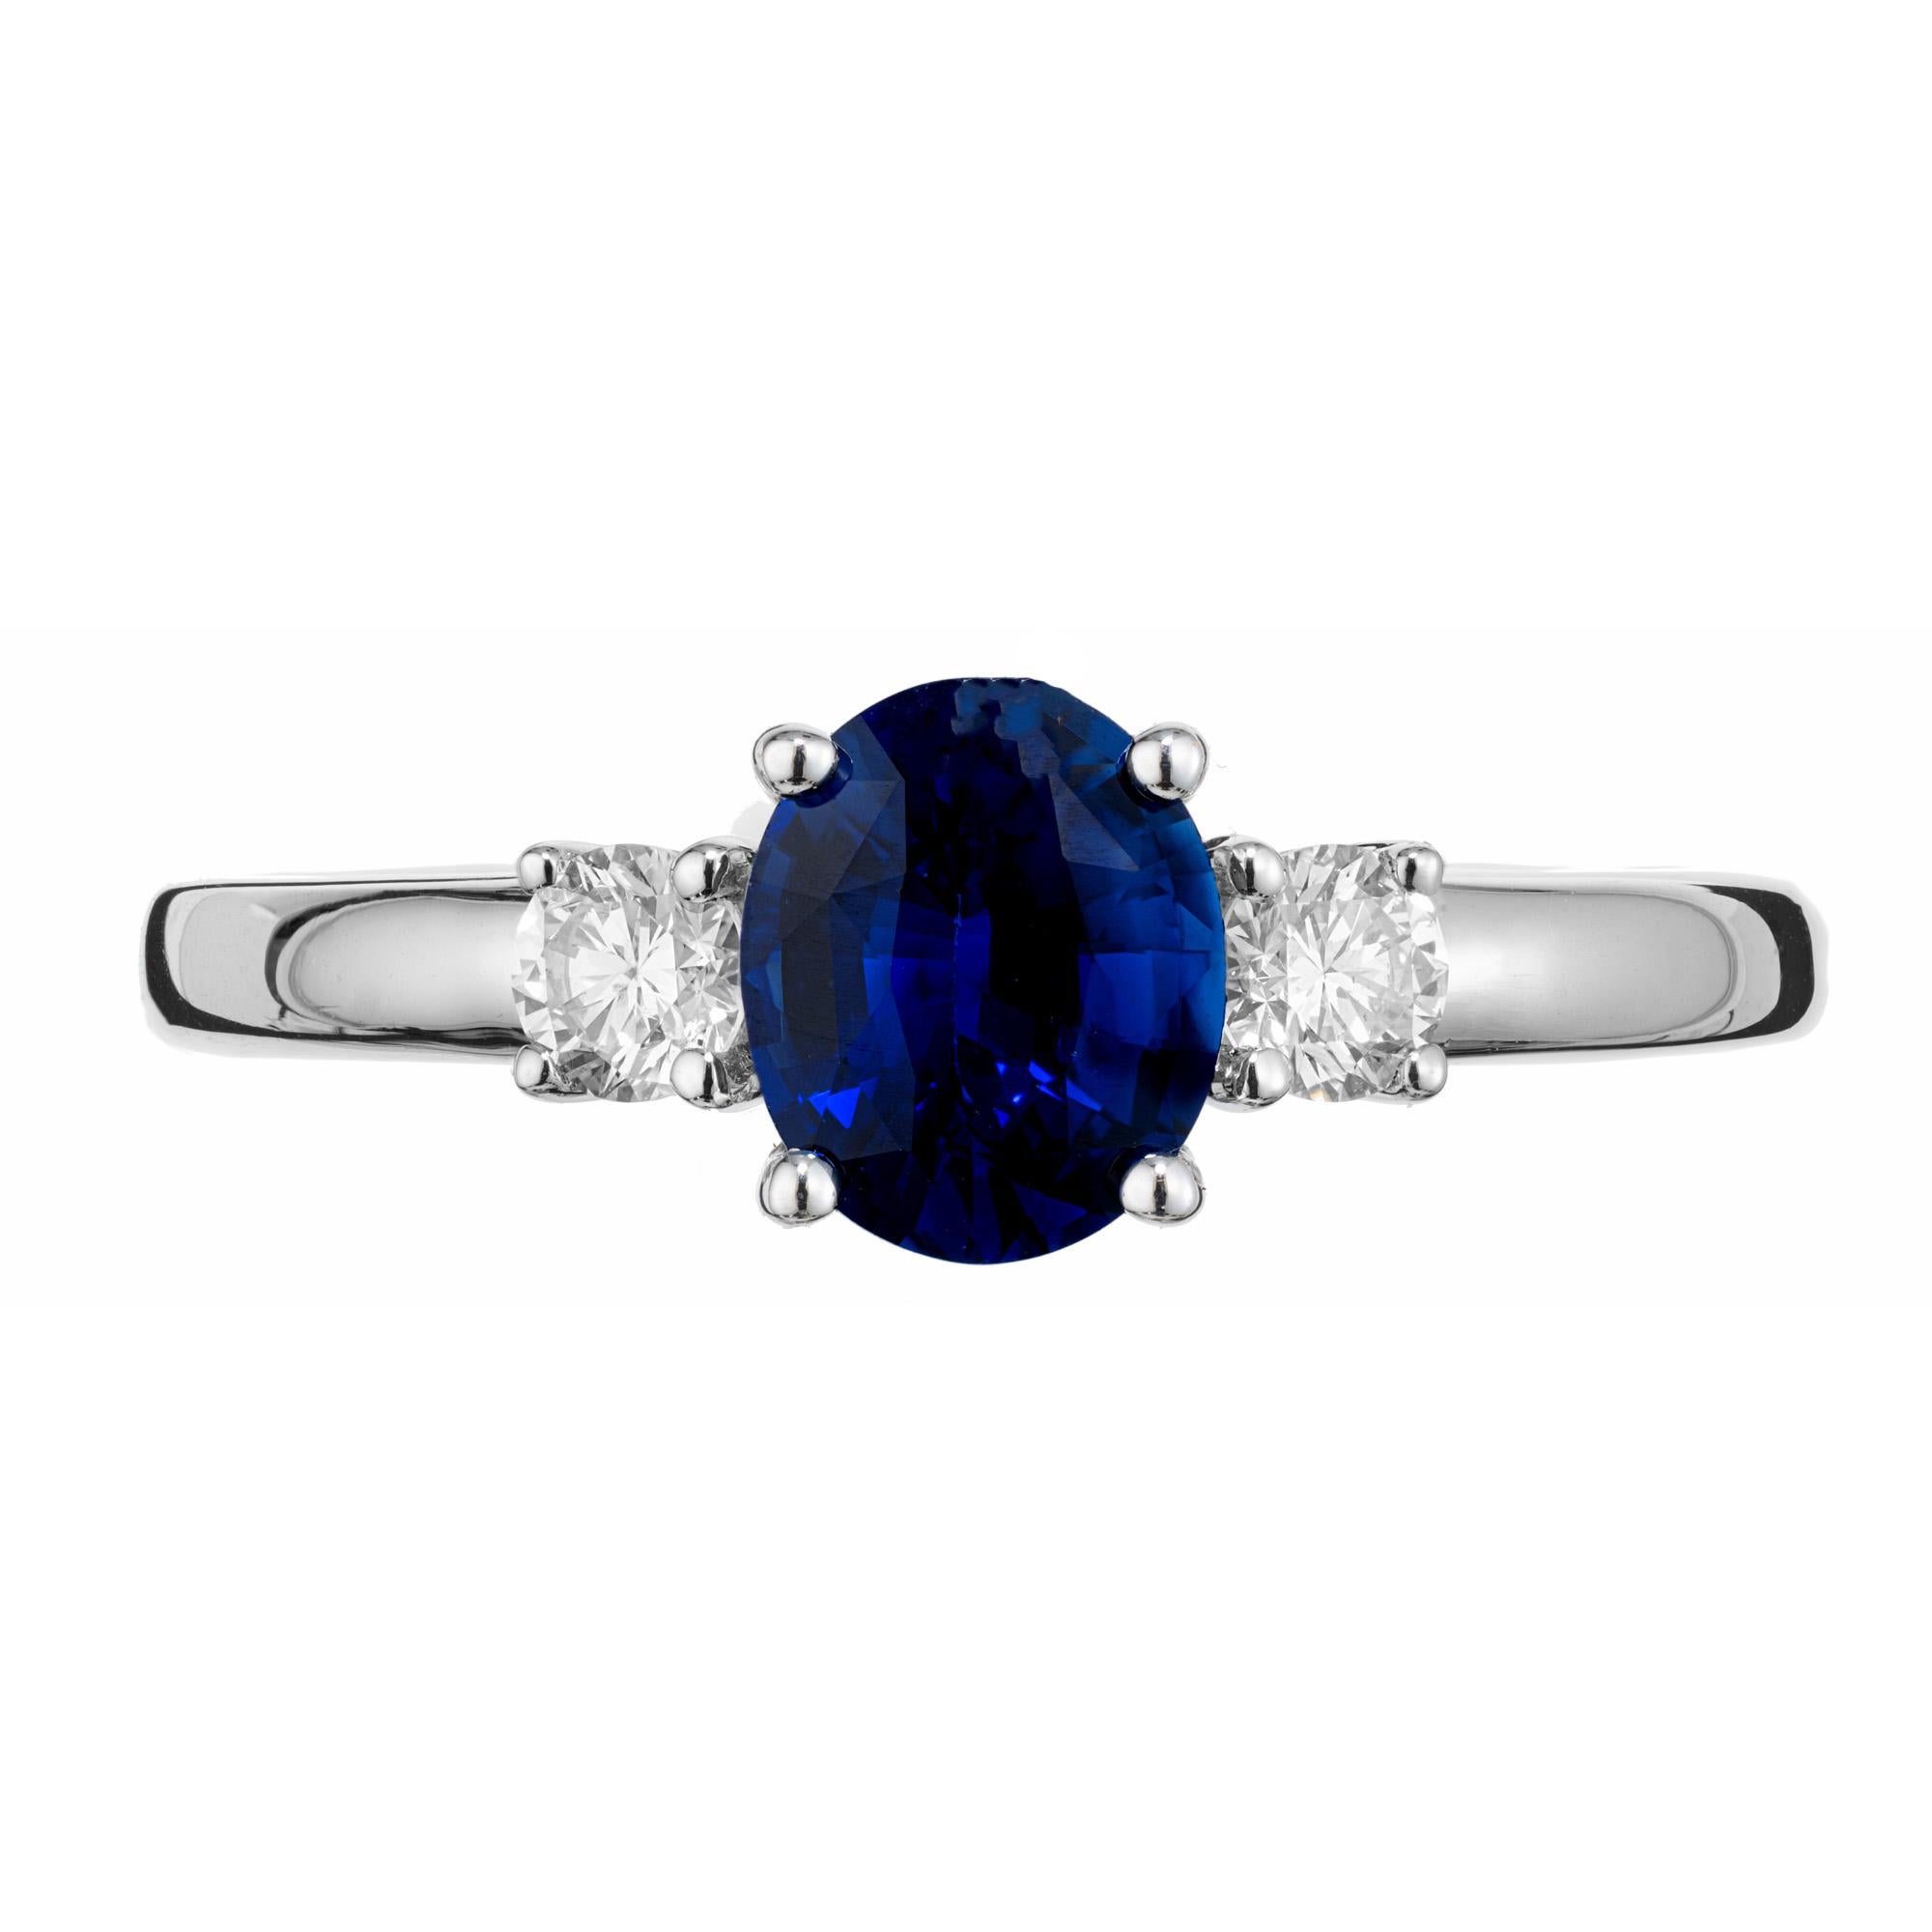 Peter Suchy GIA Certified Sapphire Diamond White Gold Engagement Ring. Oval 1.24 carat center sapphire mounted in a 14k white gold three-stone setting with 2 round brilliant cut side diamonds. The sapphire is a deep rich blue hue which is enhanced